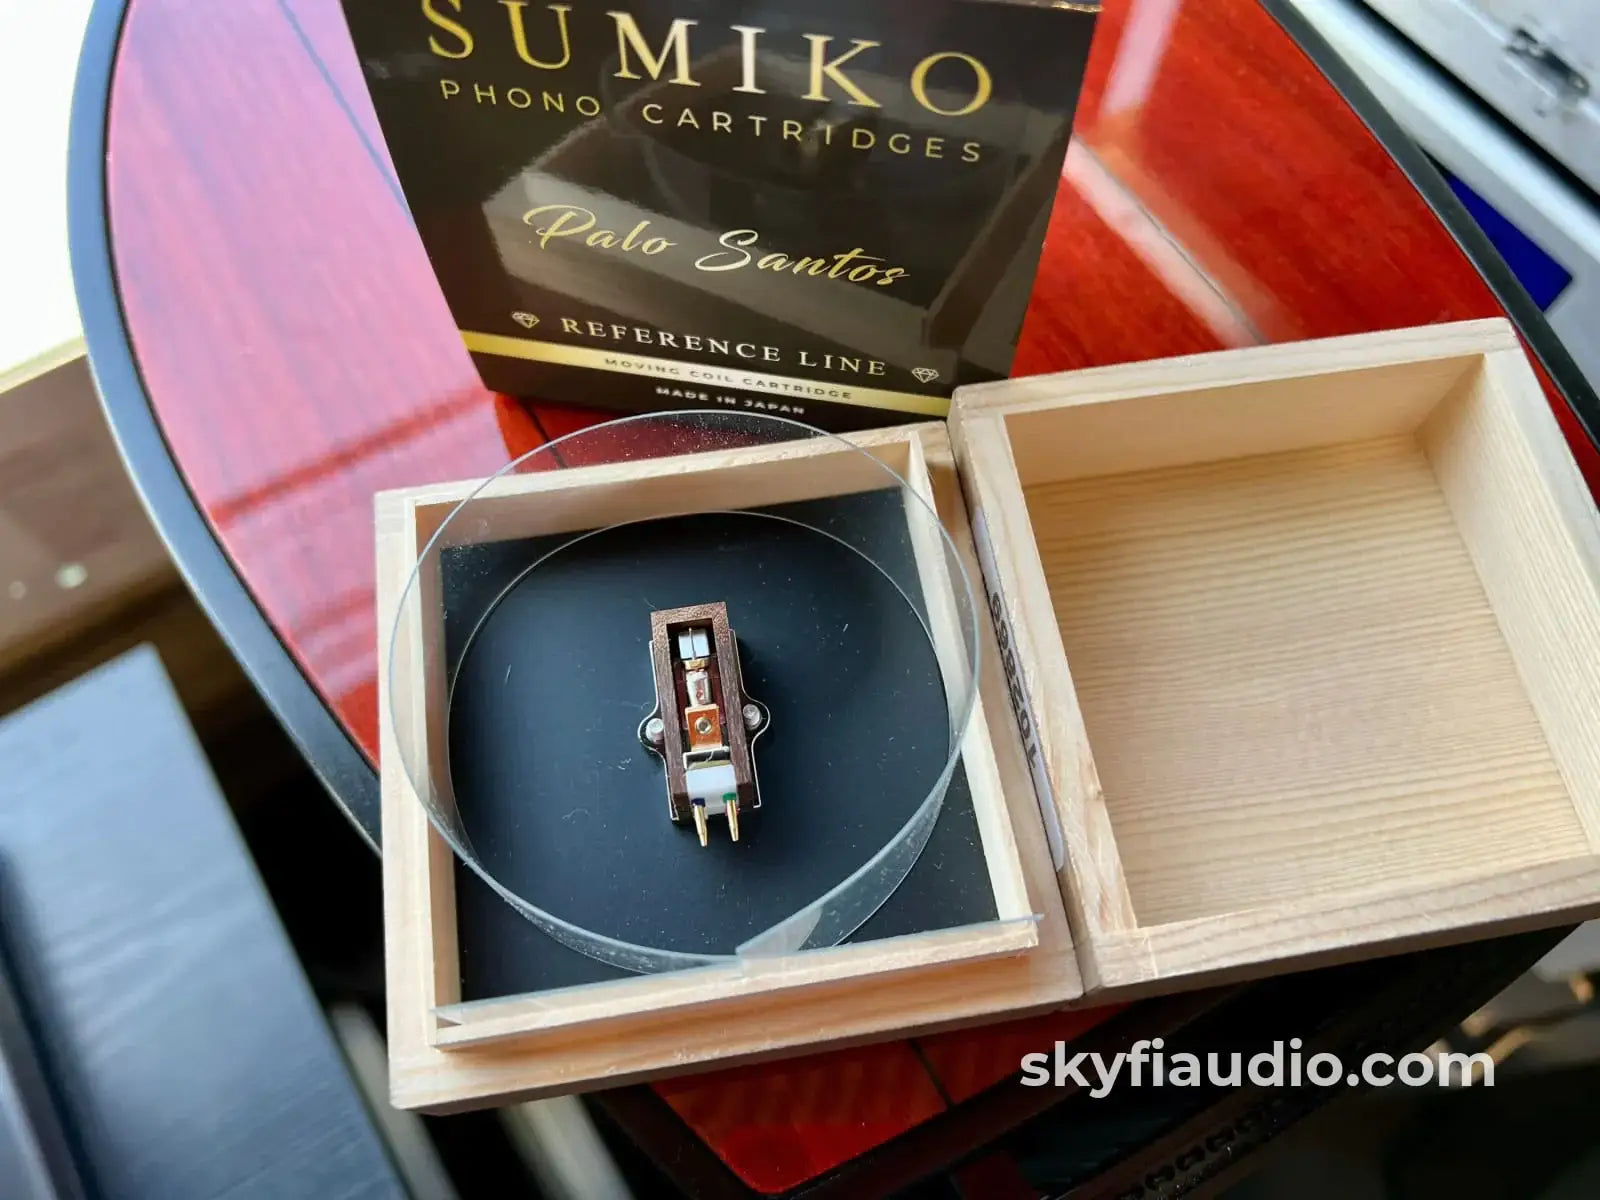 Direct Drive Turntable System Sl-1000Re-S With Sumiko Palo Santos Cartridge